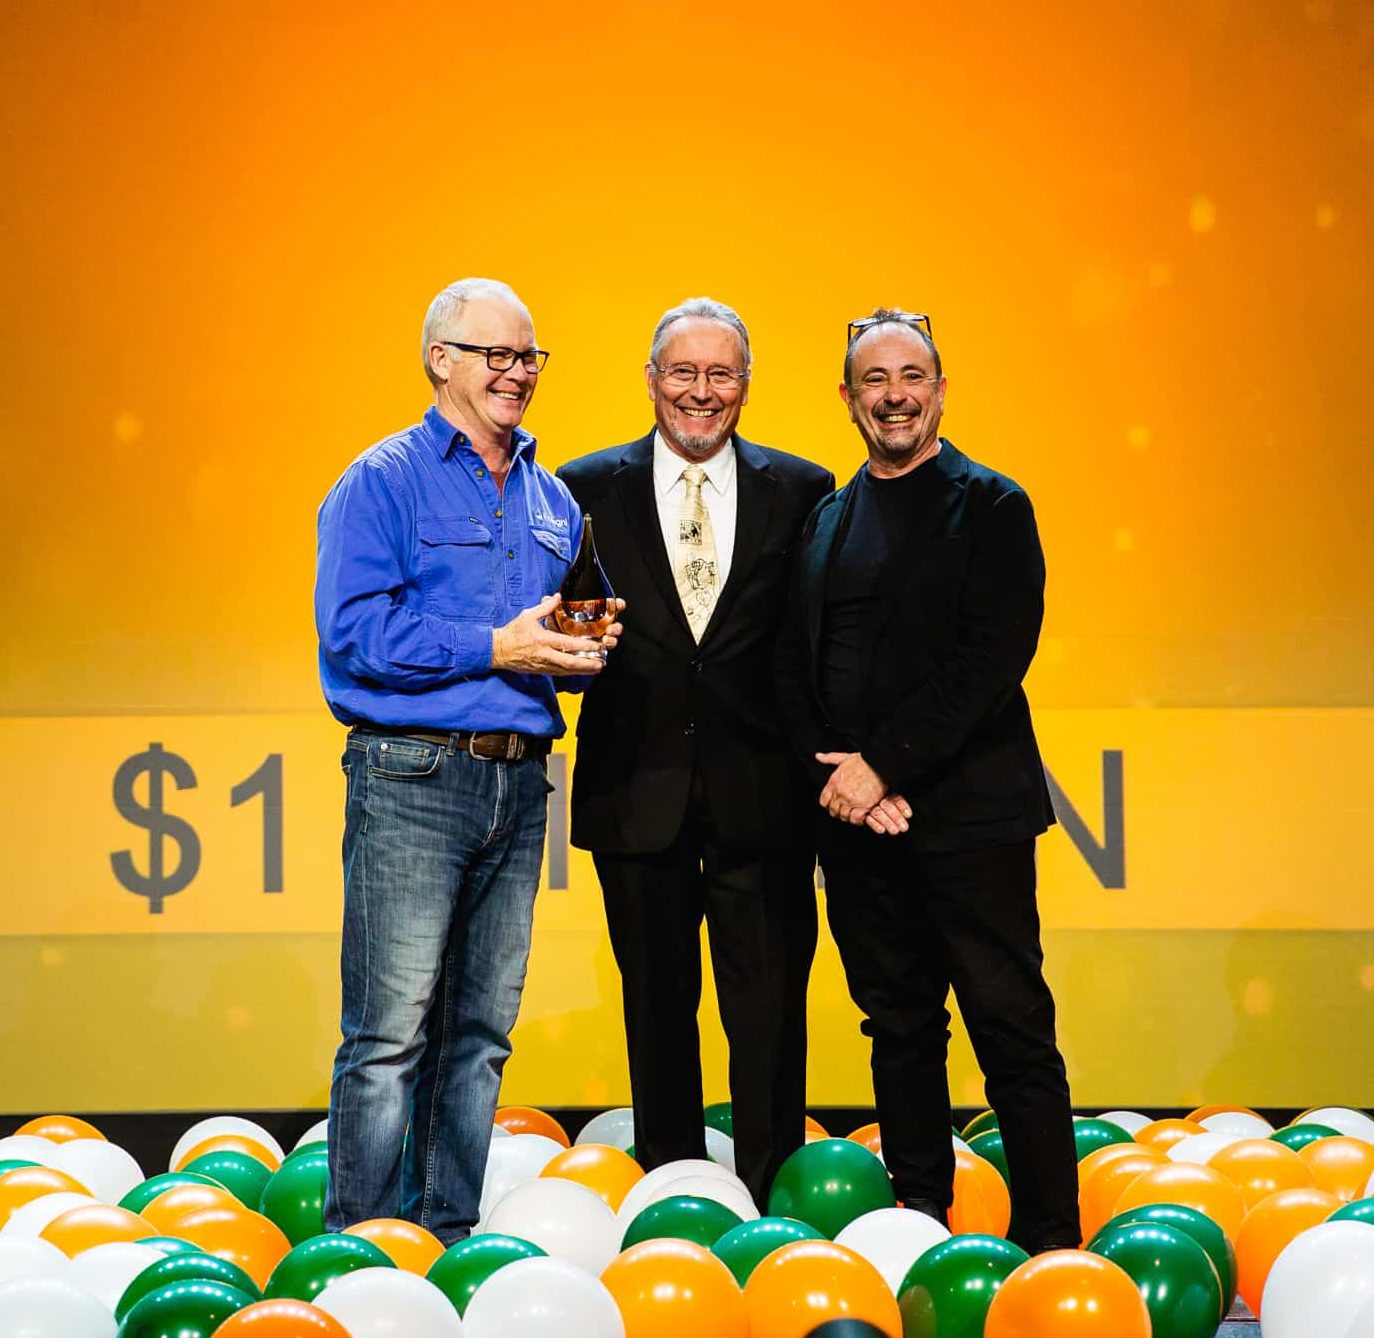 three men stand on a stage holding a prize surrounded by balloons